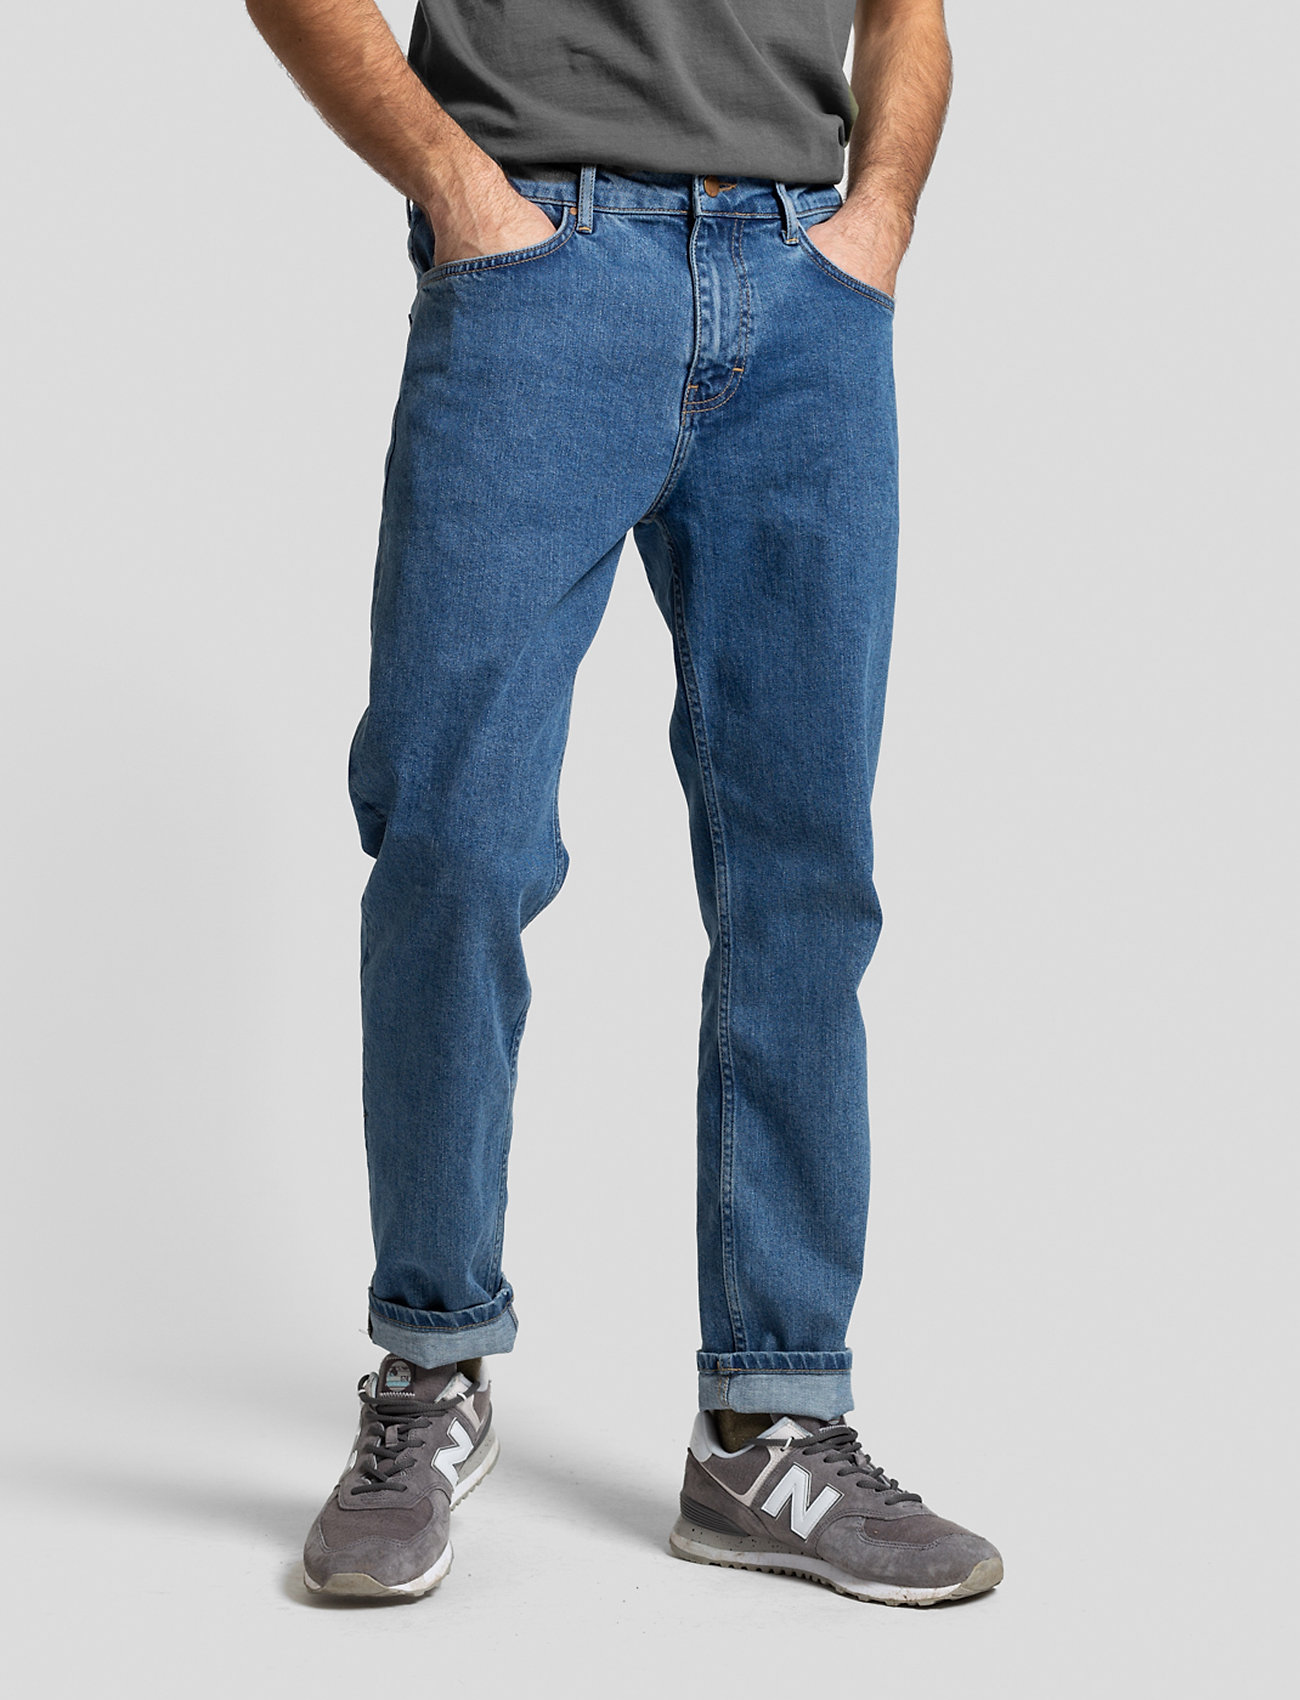 Revolution - Stone washed blue loose jeans - relaxed jeans - blue - 0